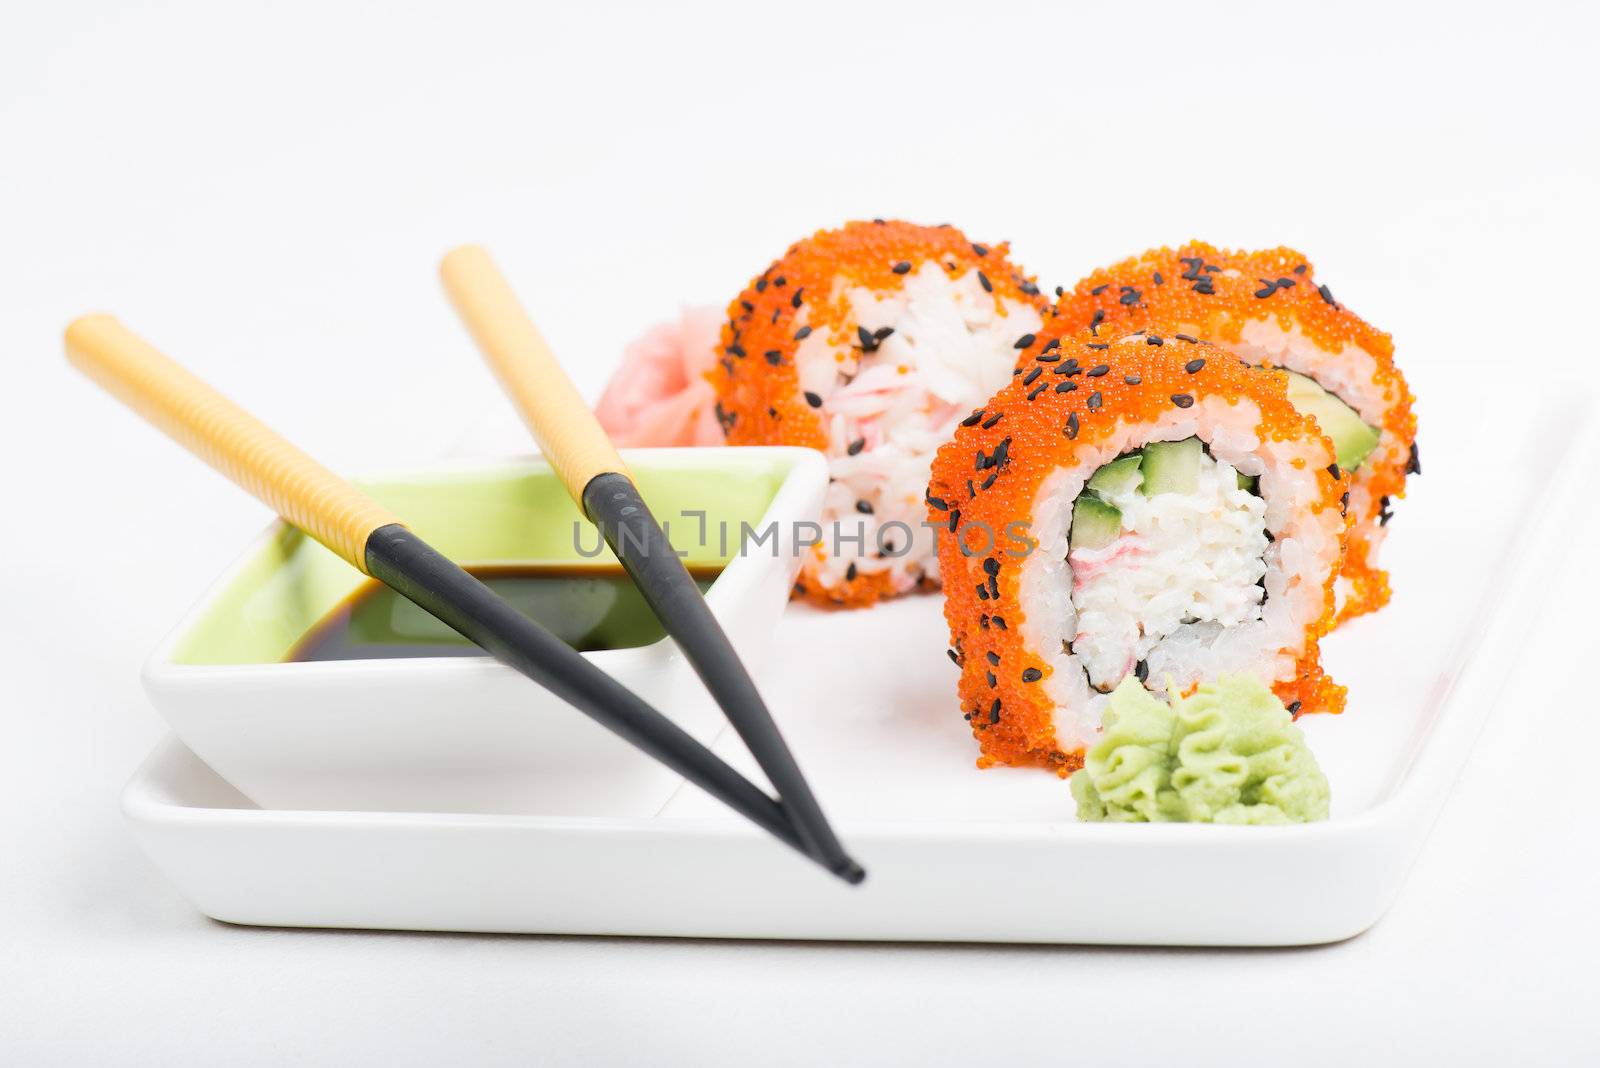 Chopsticks and sushi on the plate, light background